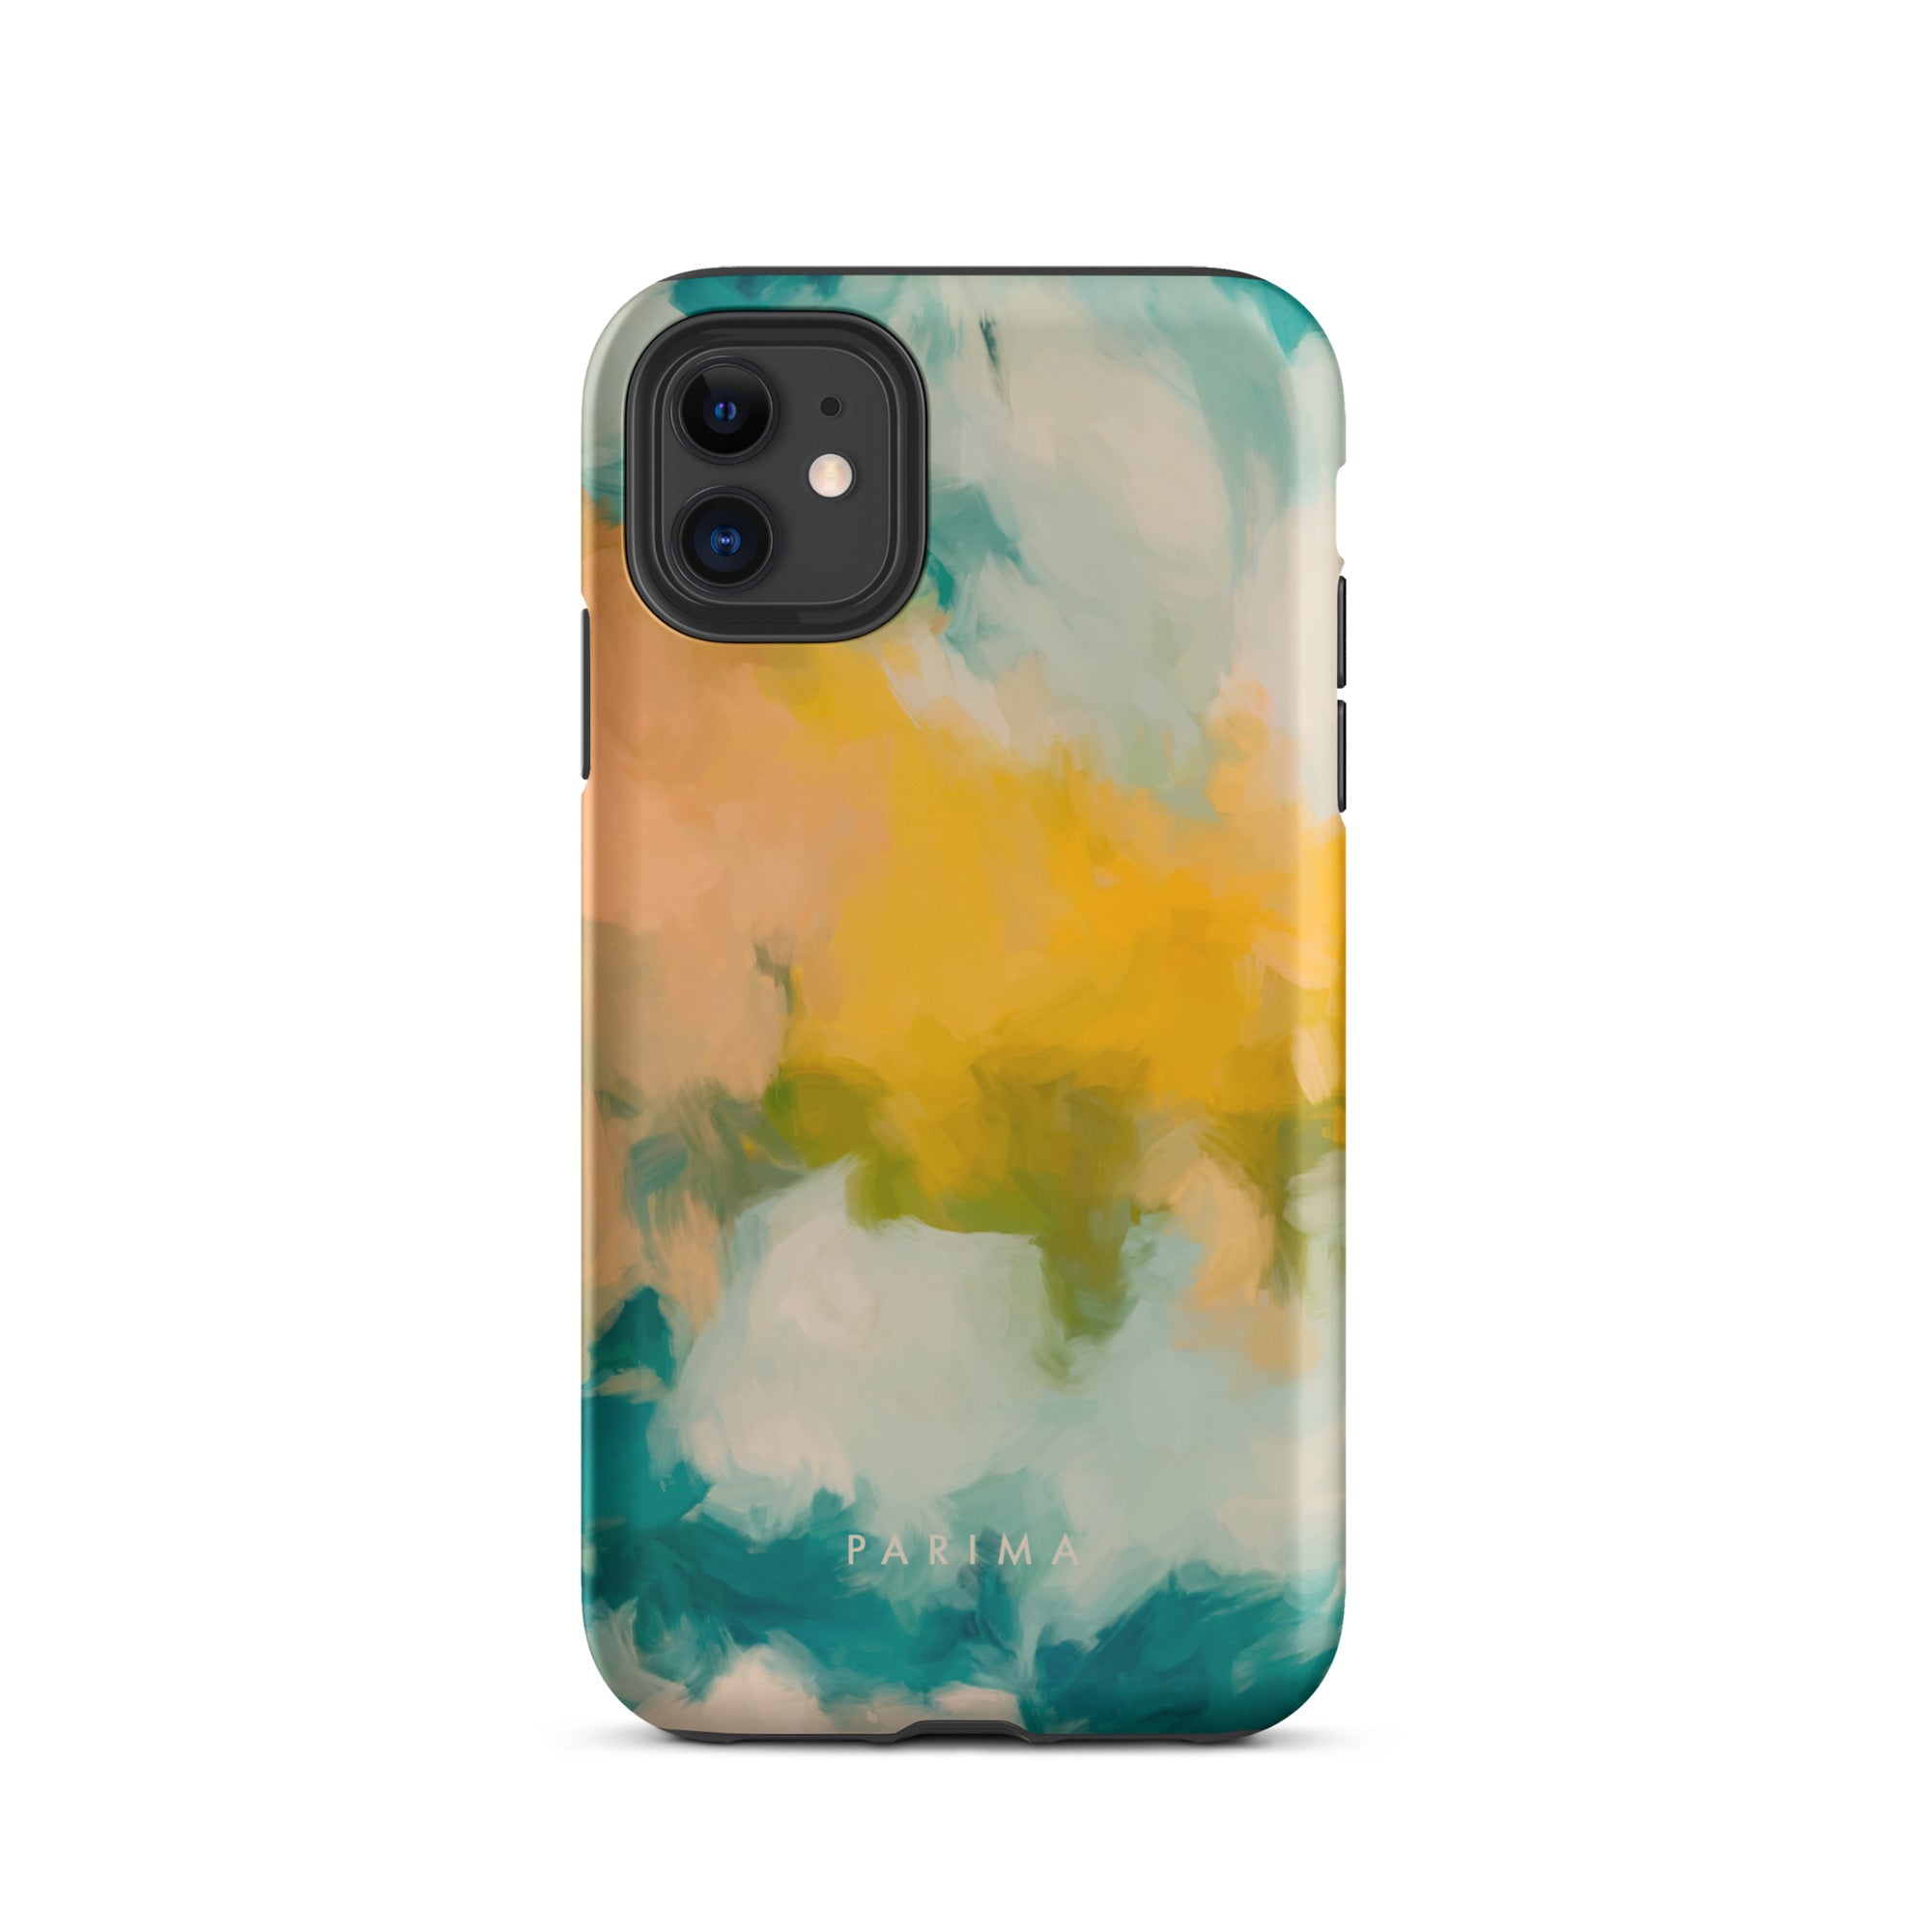 Beach Day, blue and yellow abstract art - iPhone 11 tough case by Parima Studio